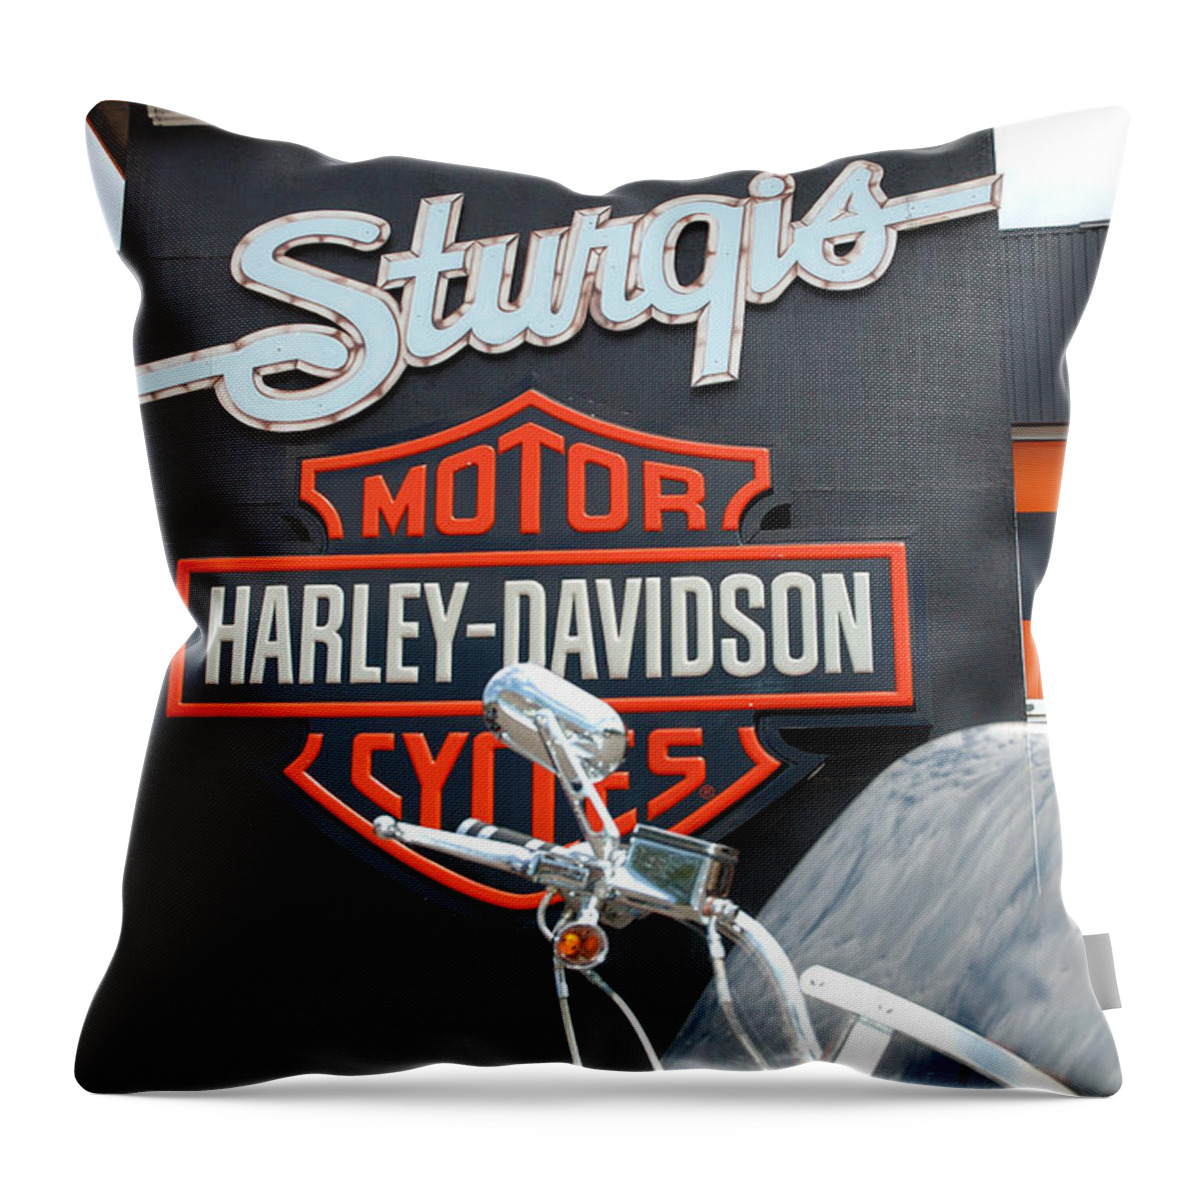 Sturgis Throw Pillow featuring the photograph Sturgis Harley store by Micah May